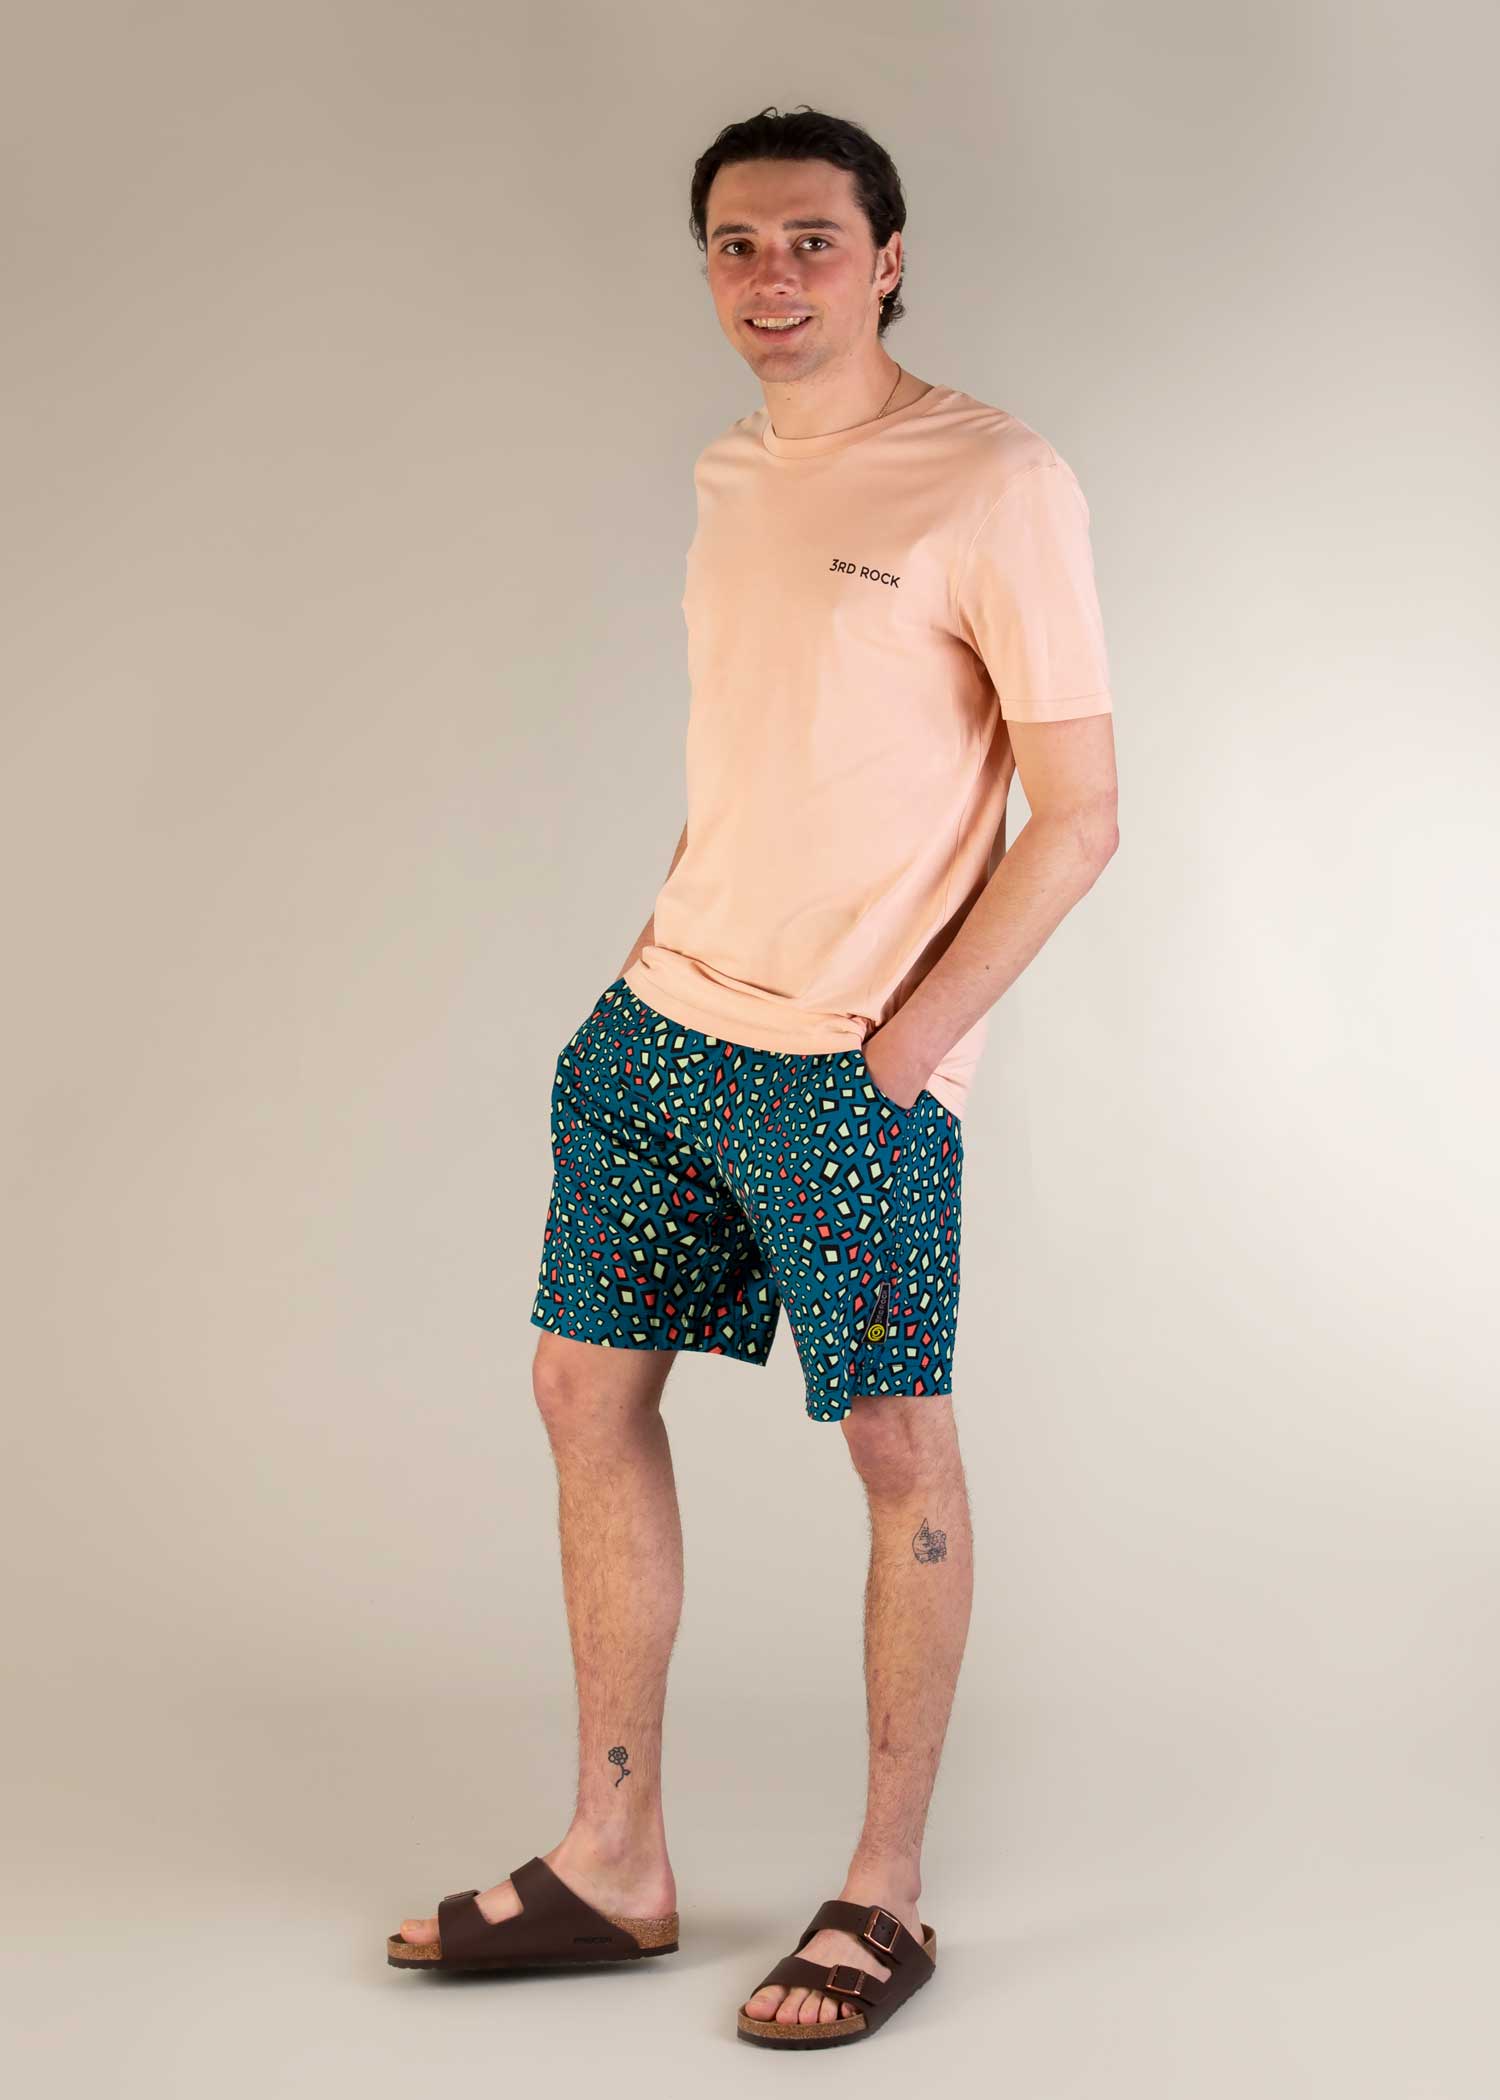 3RD ROCK Sustainable Mens shorts - Kai is 6ft 1" with a 32" waist and is wearing a 32. M